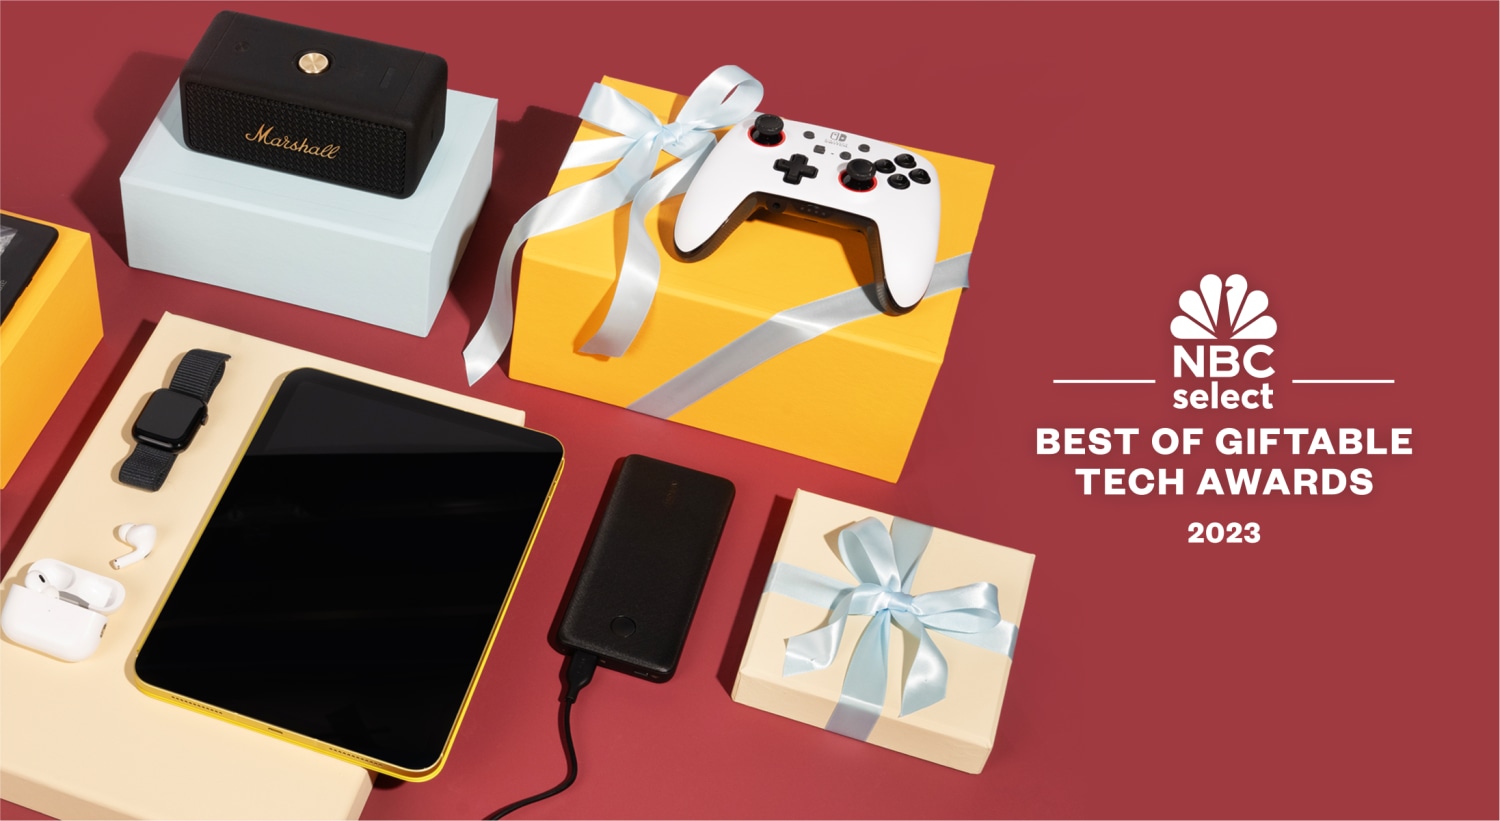 Best Tech Gifts for 2020